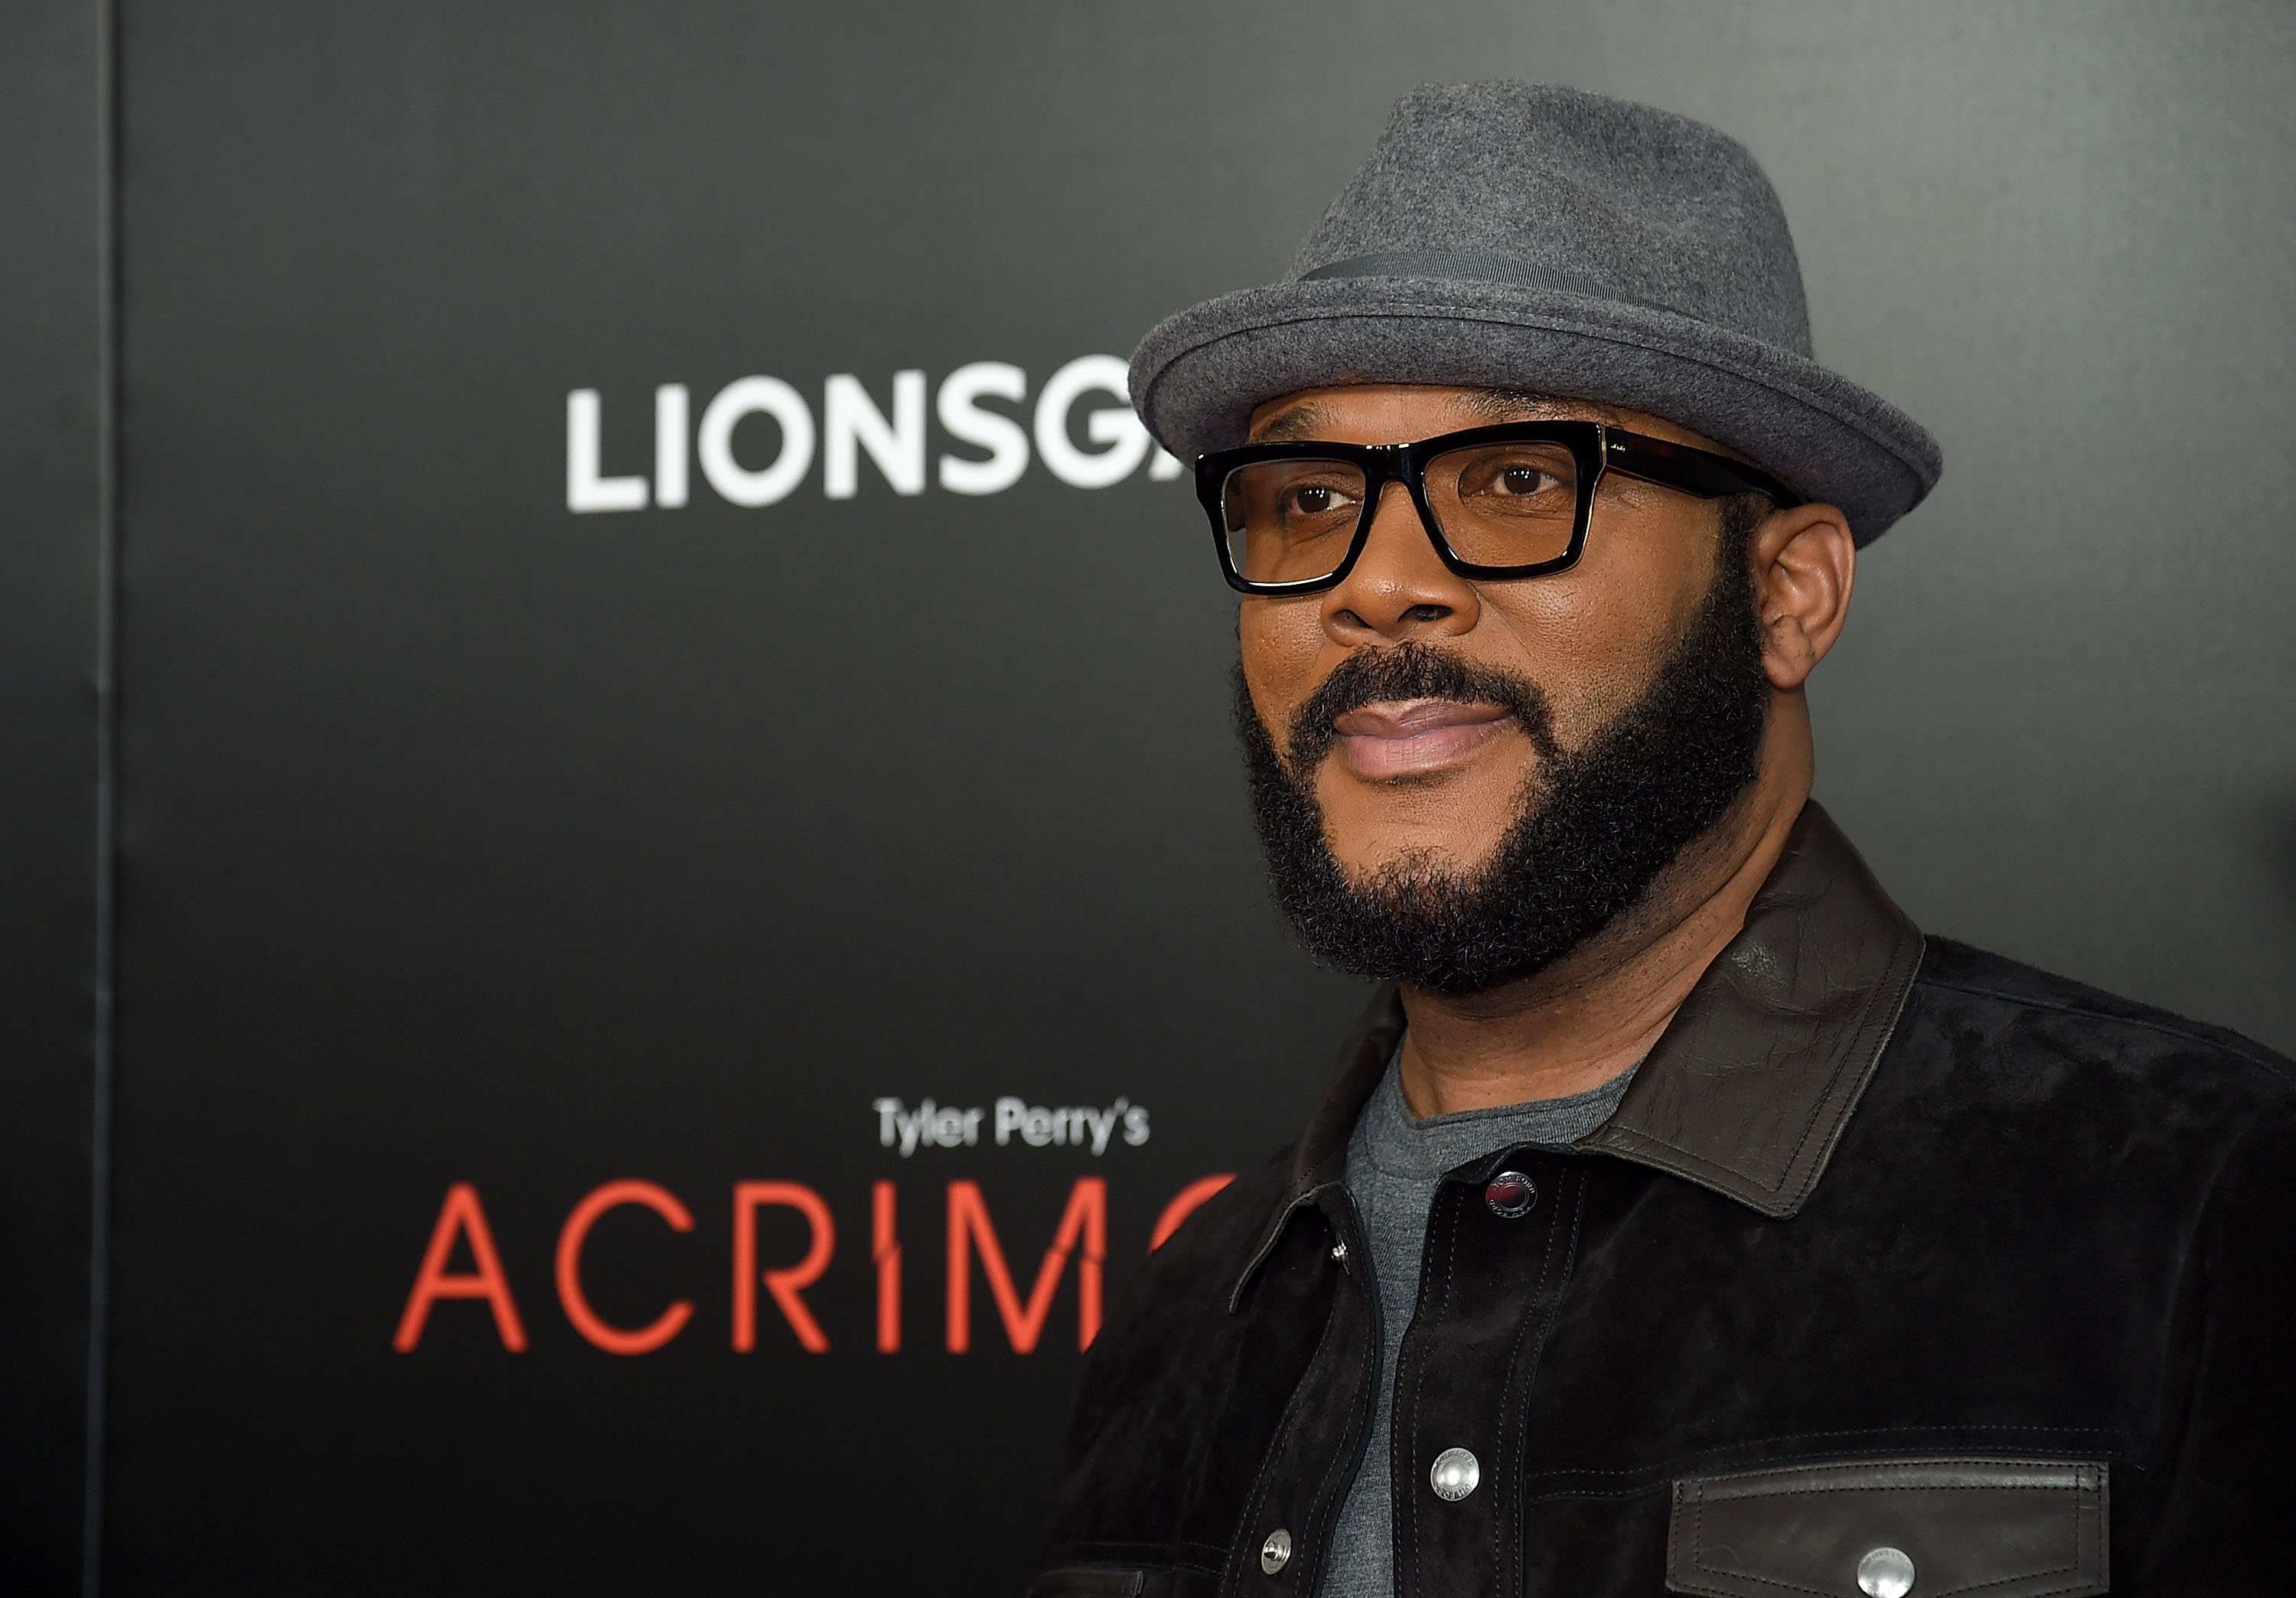 Tyler Perry attends the "Acrimony" New York Premiere on March 27, 2018 in New York City | Photo: GettyImages 